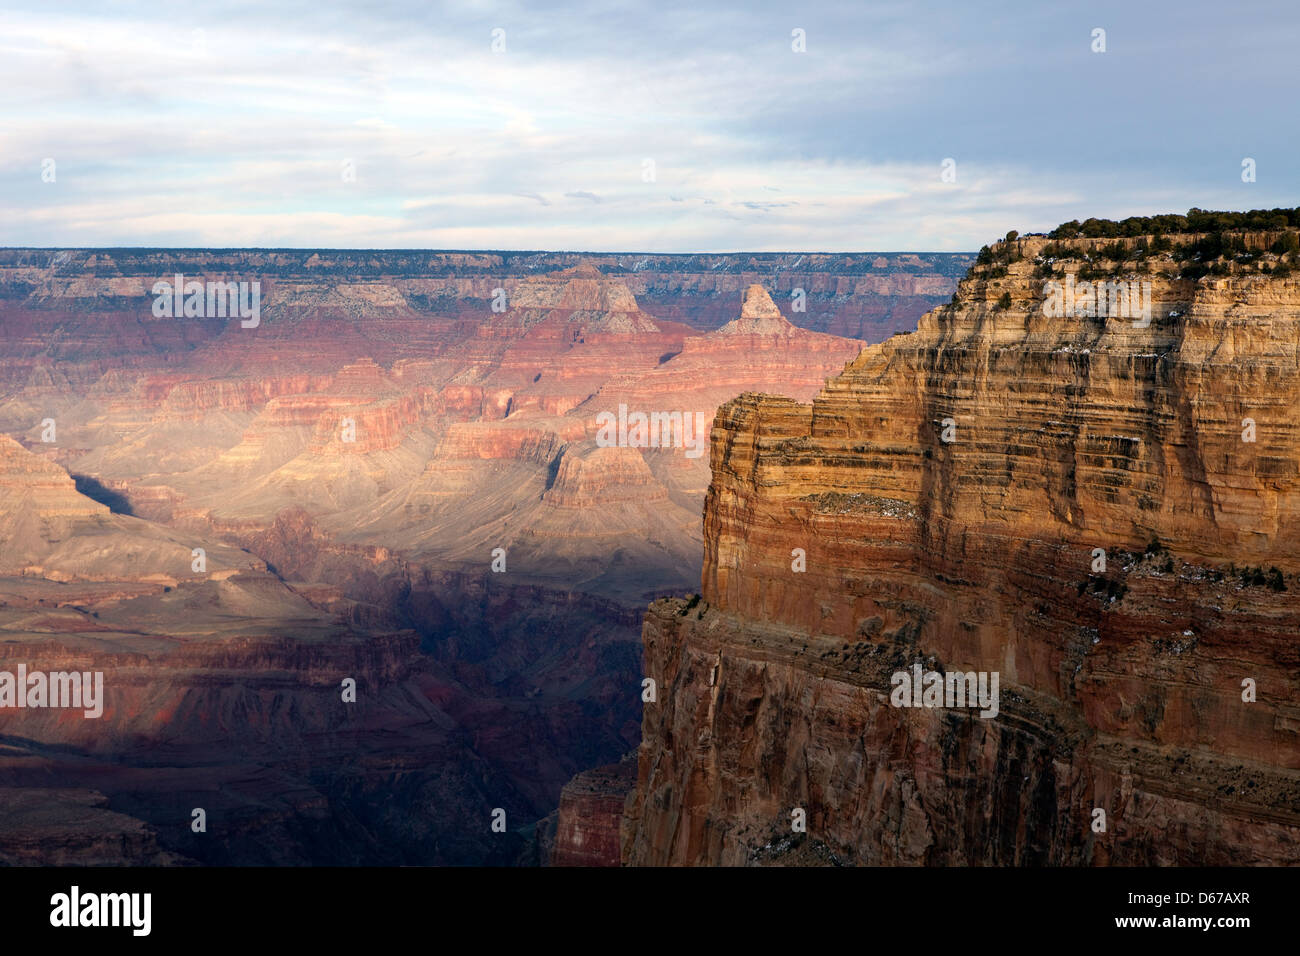 A view of the Grand Canyon in Arizona, USA Stock Photo